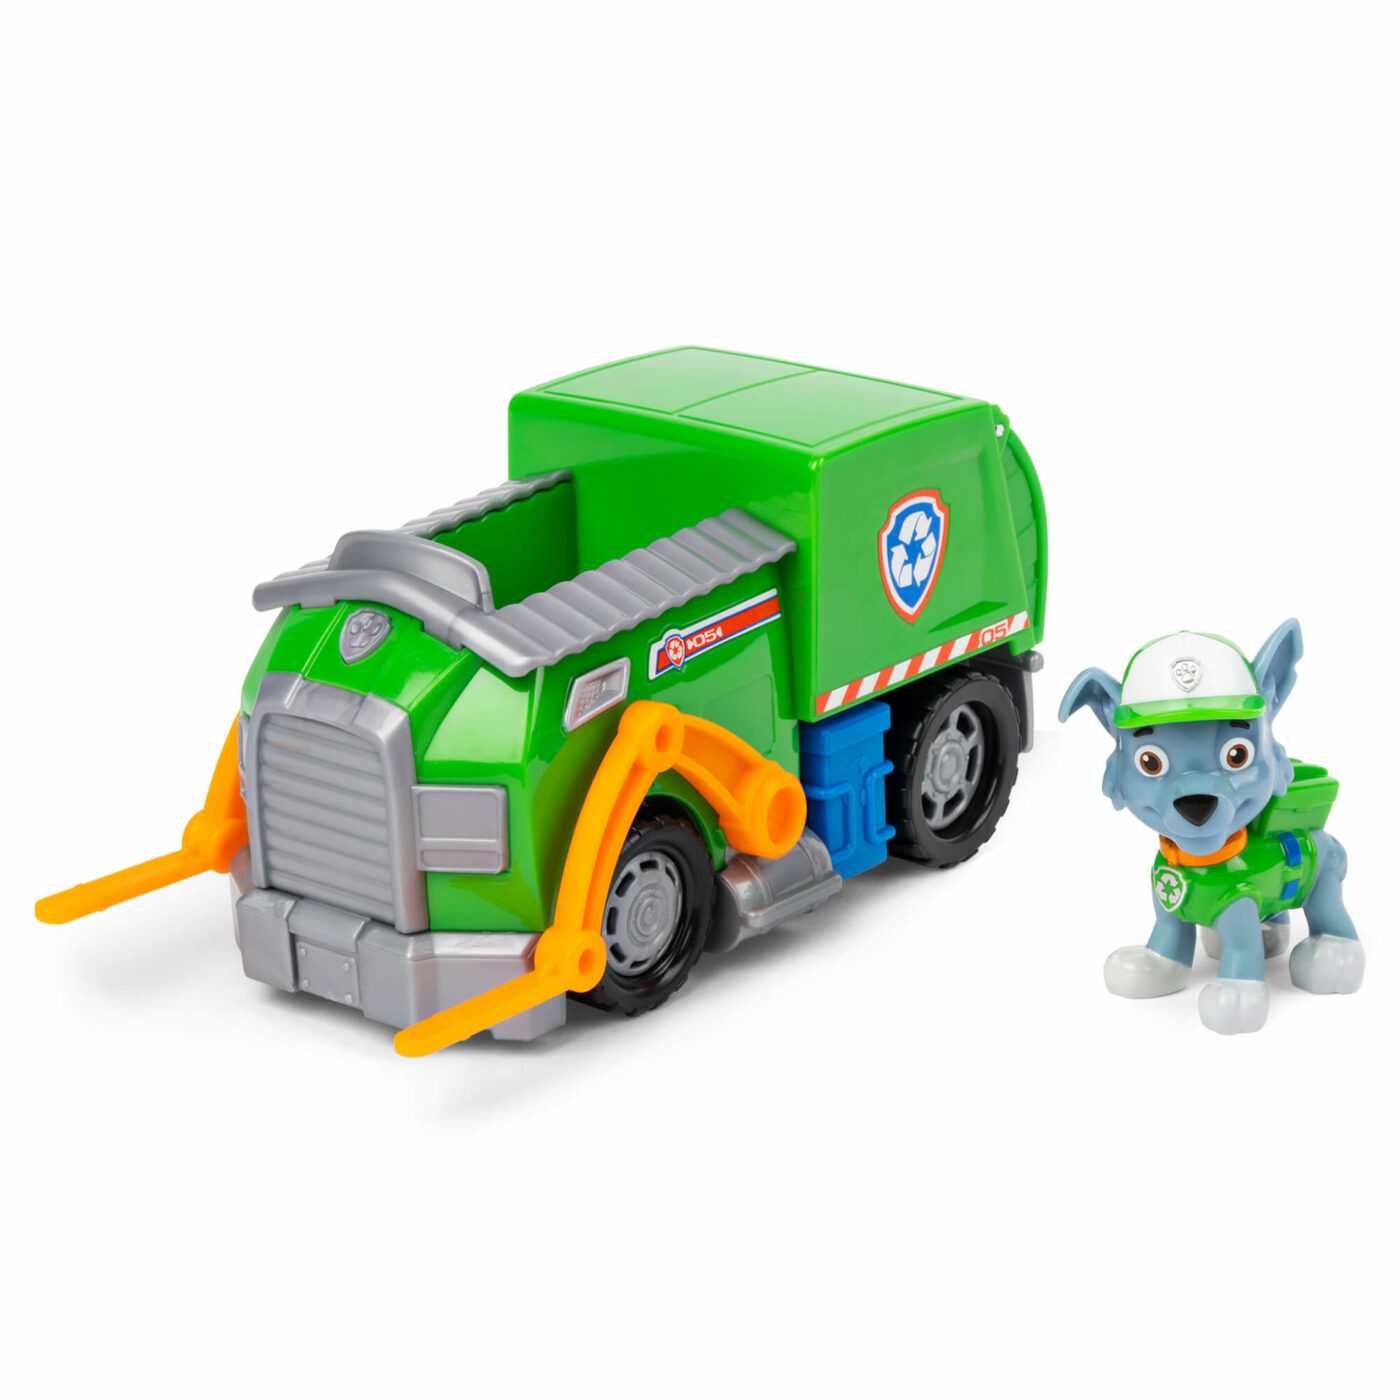 Nickelodeon - Paw Patrol Vehicle - Rocky Recycle Truck1